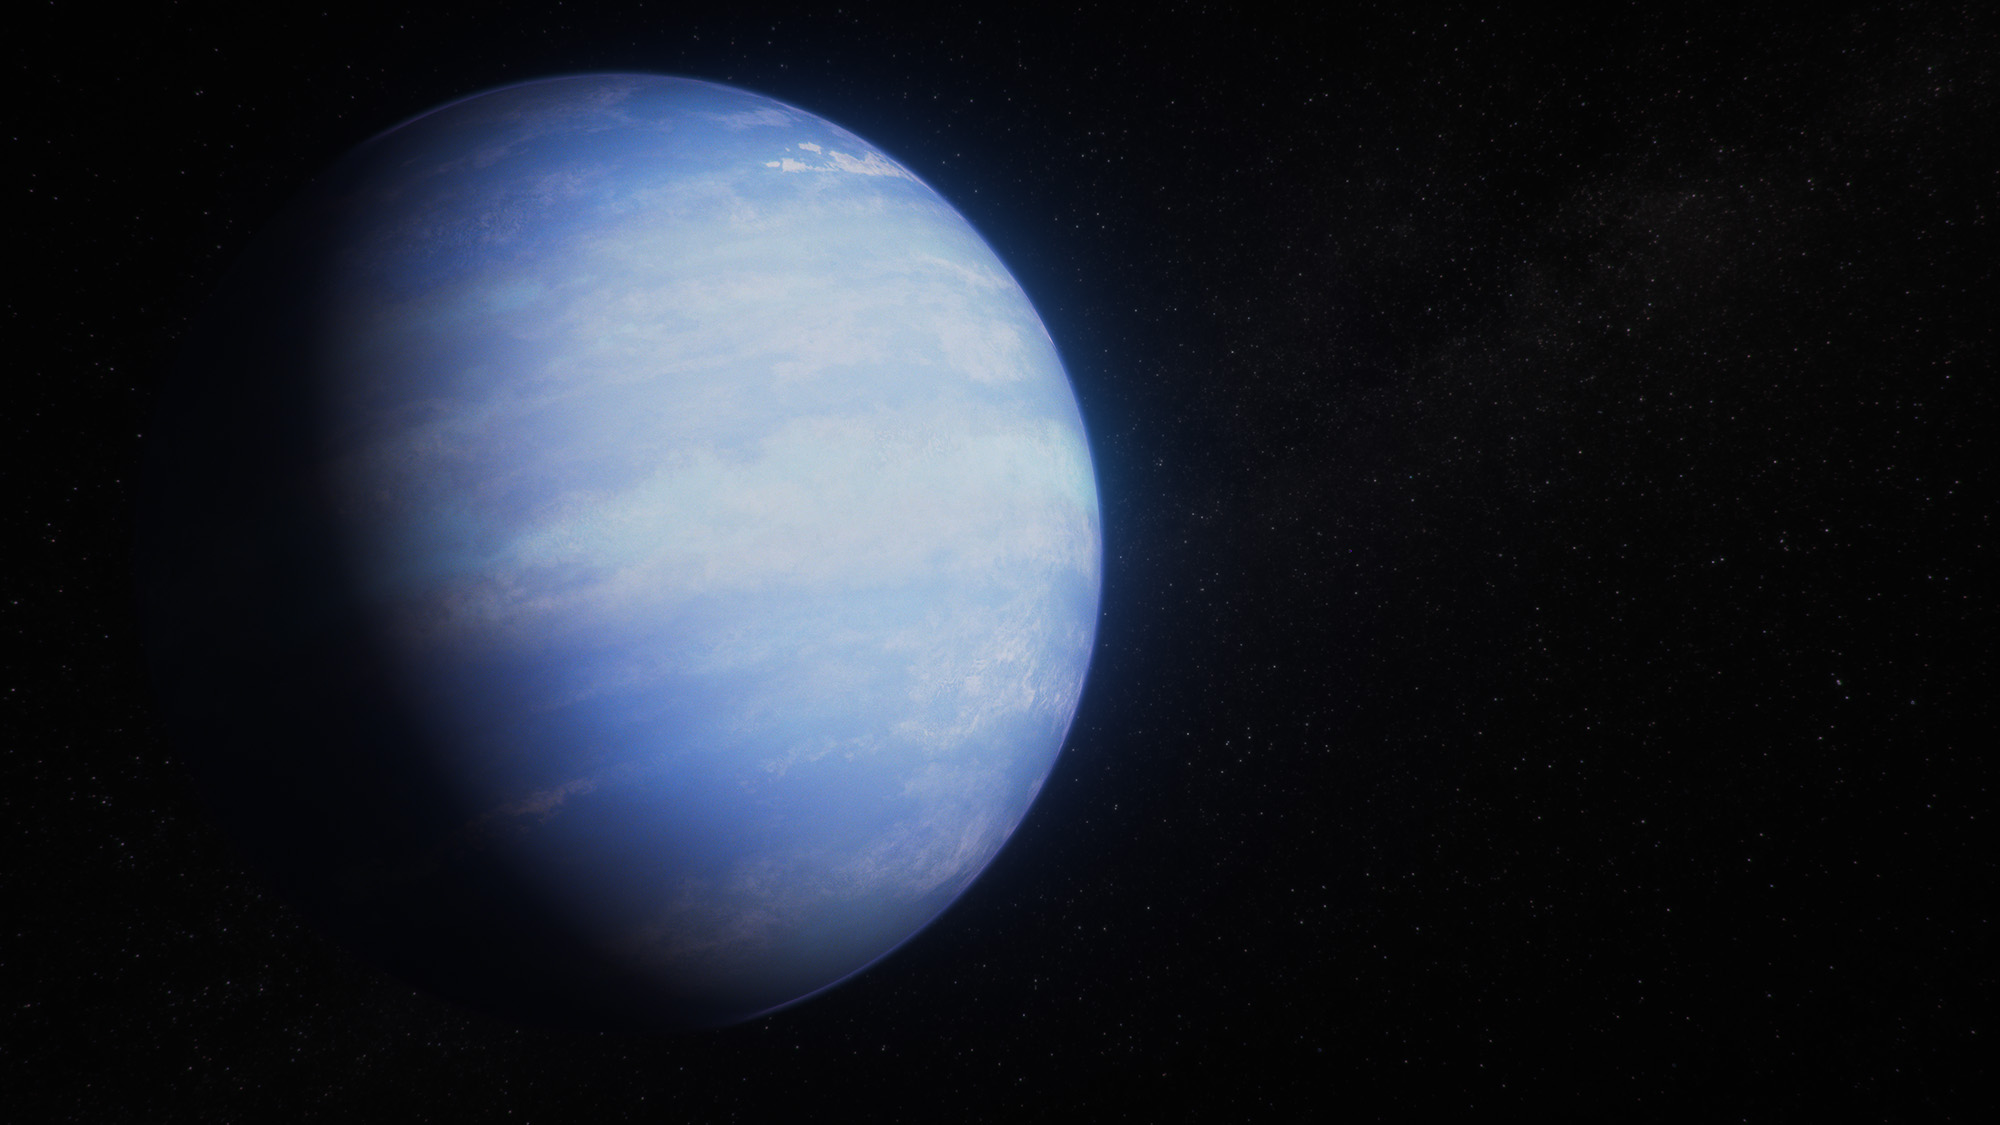 This artist’s concept shows what the warm Neptune exoplanet WASP-107 b could look like based on recent data gathered by NASA’s James Webb Space Telescope along with previous observations from NASA’s Hubble Space Telescope and other observatories. Observations captured by Hubble’s WFC3 (Wide Field Camera 3), Webb’s NIRCam (Near-Infrared Camera), Webb’s NIRSpec (Near-Infrared Spectrograph), and Webb’s MIRI (Mid-Infrared Instrument) suggest that the planet has a relatively large core surrounded by a relatively small mass of hydrogen and helium gas, which has been inflated due to tidal heating of the interior.